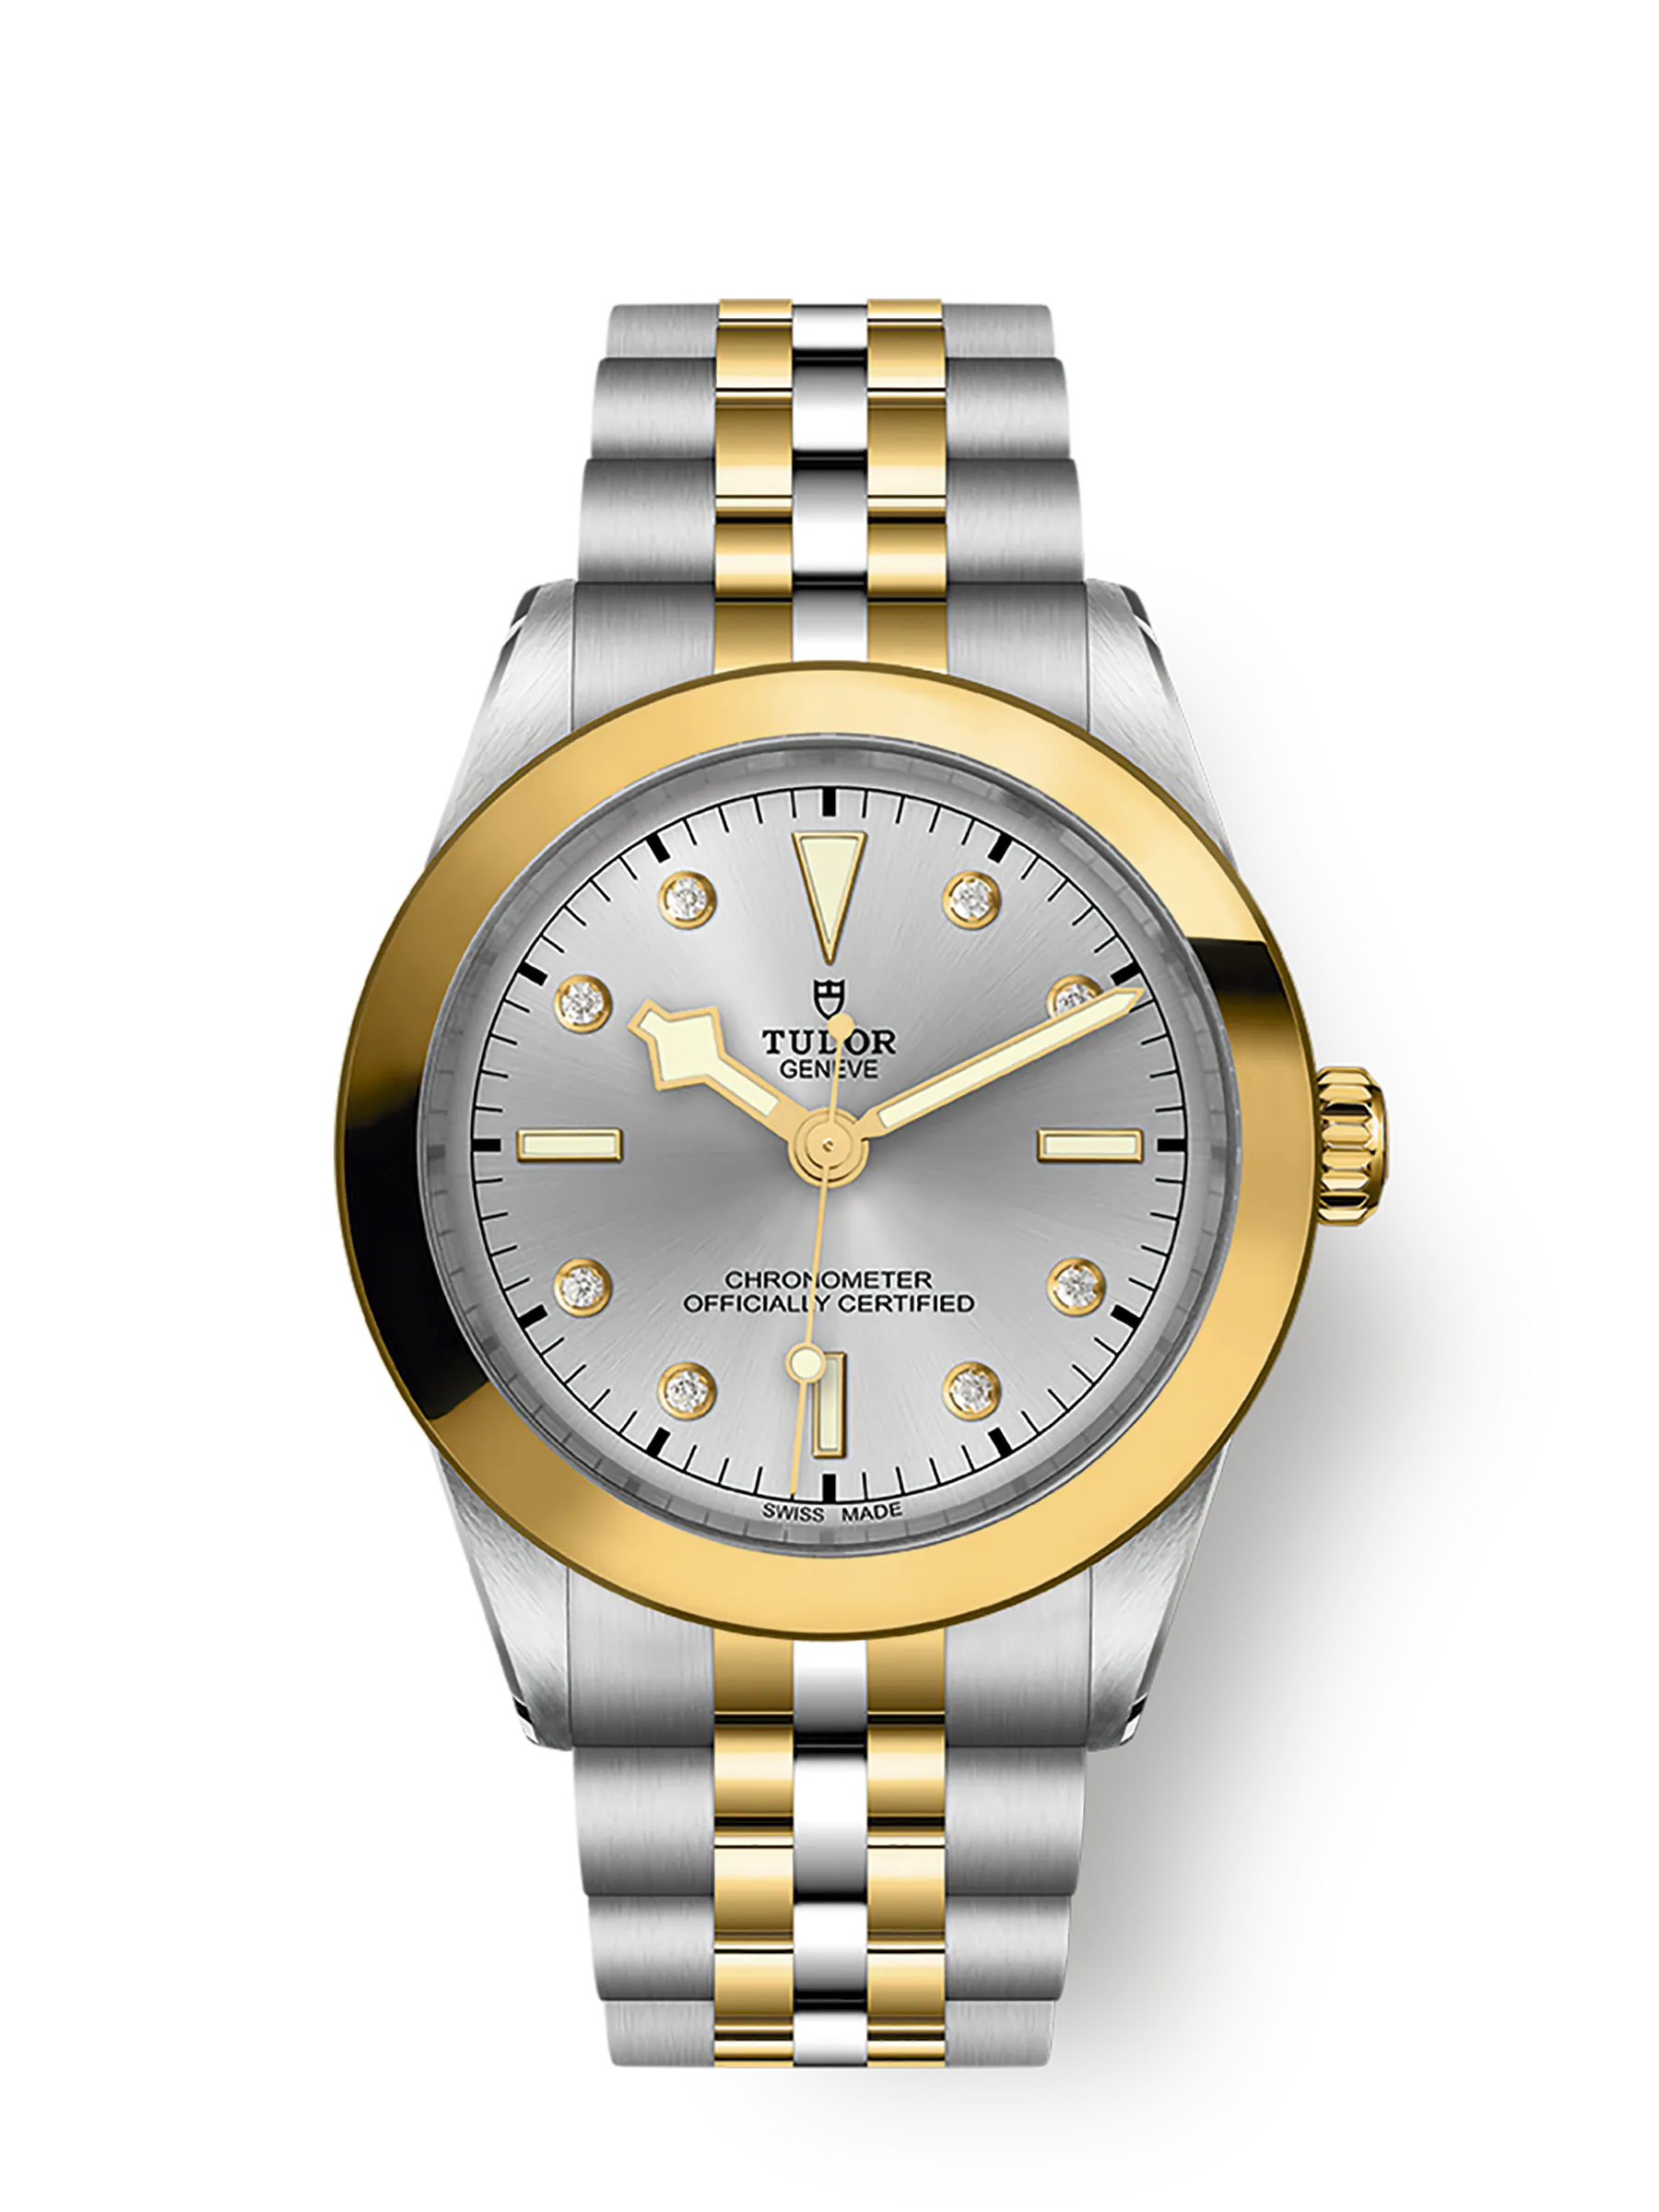 Tudor Black Bay 39 S&G, 316L Stainless Steel and 18k Yellow Gold, Ref# M79663-0007